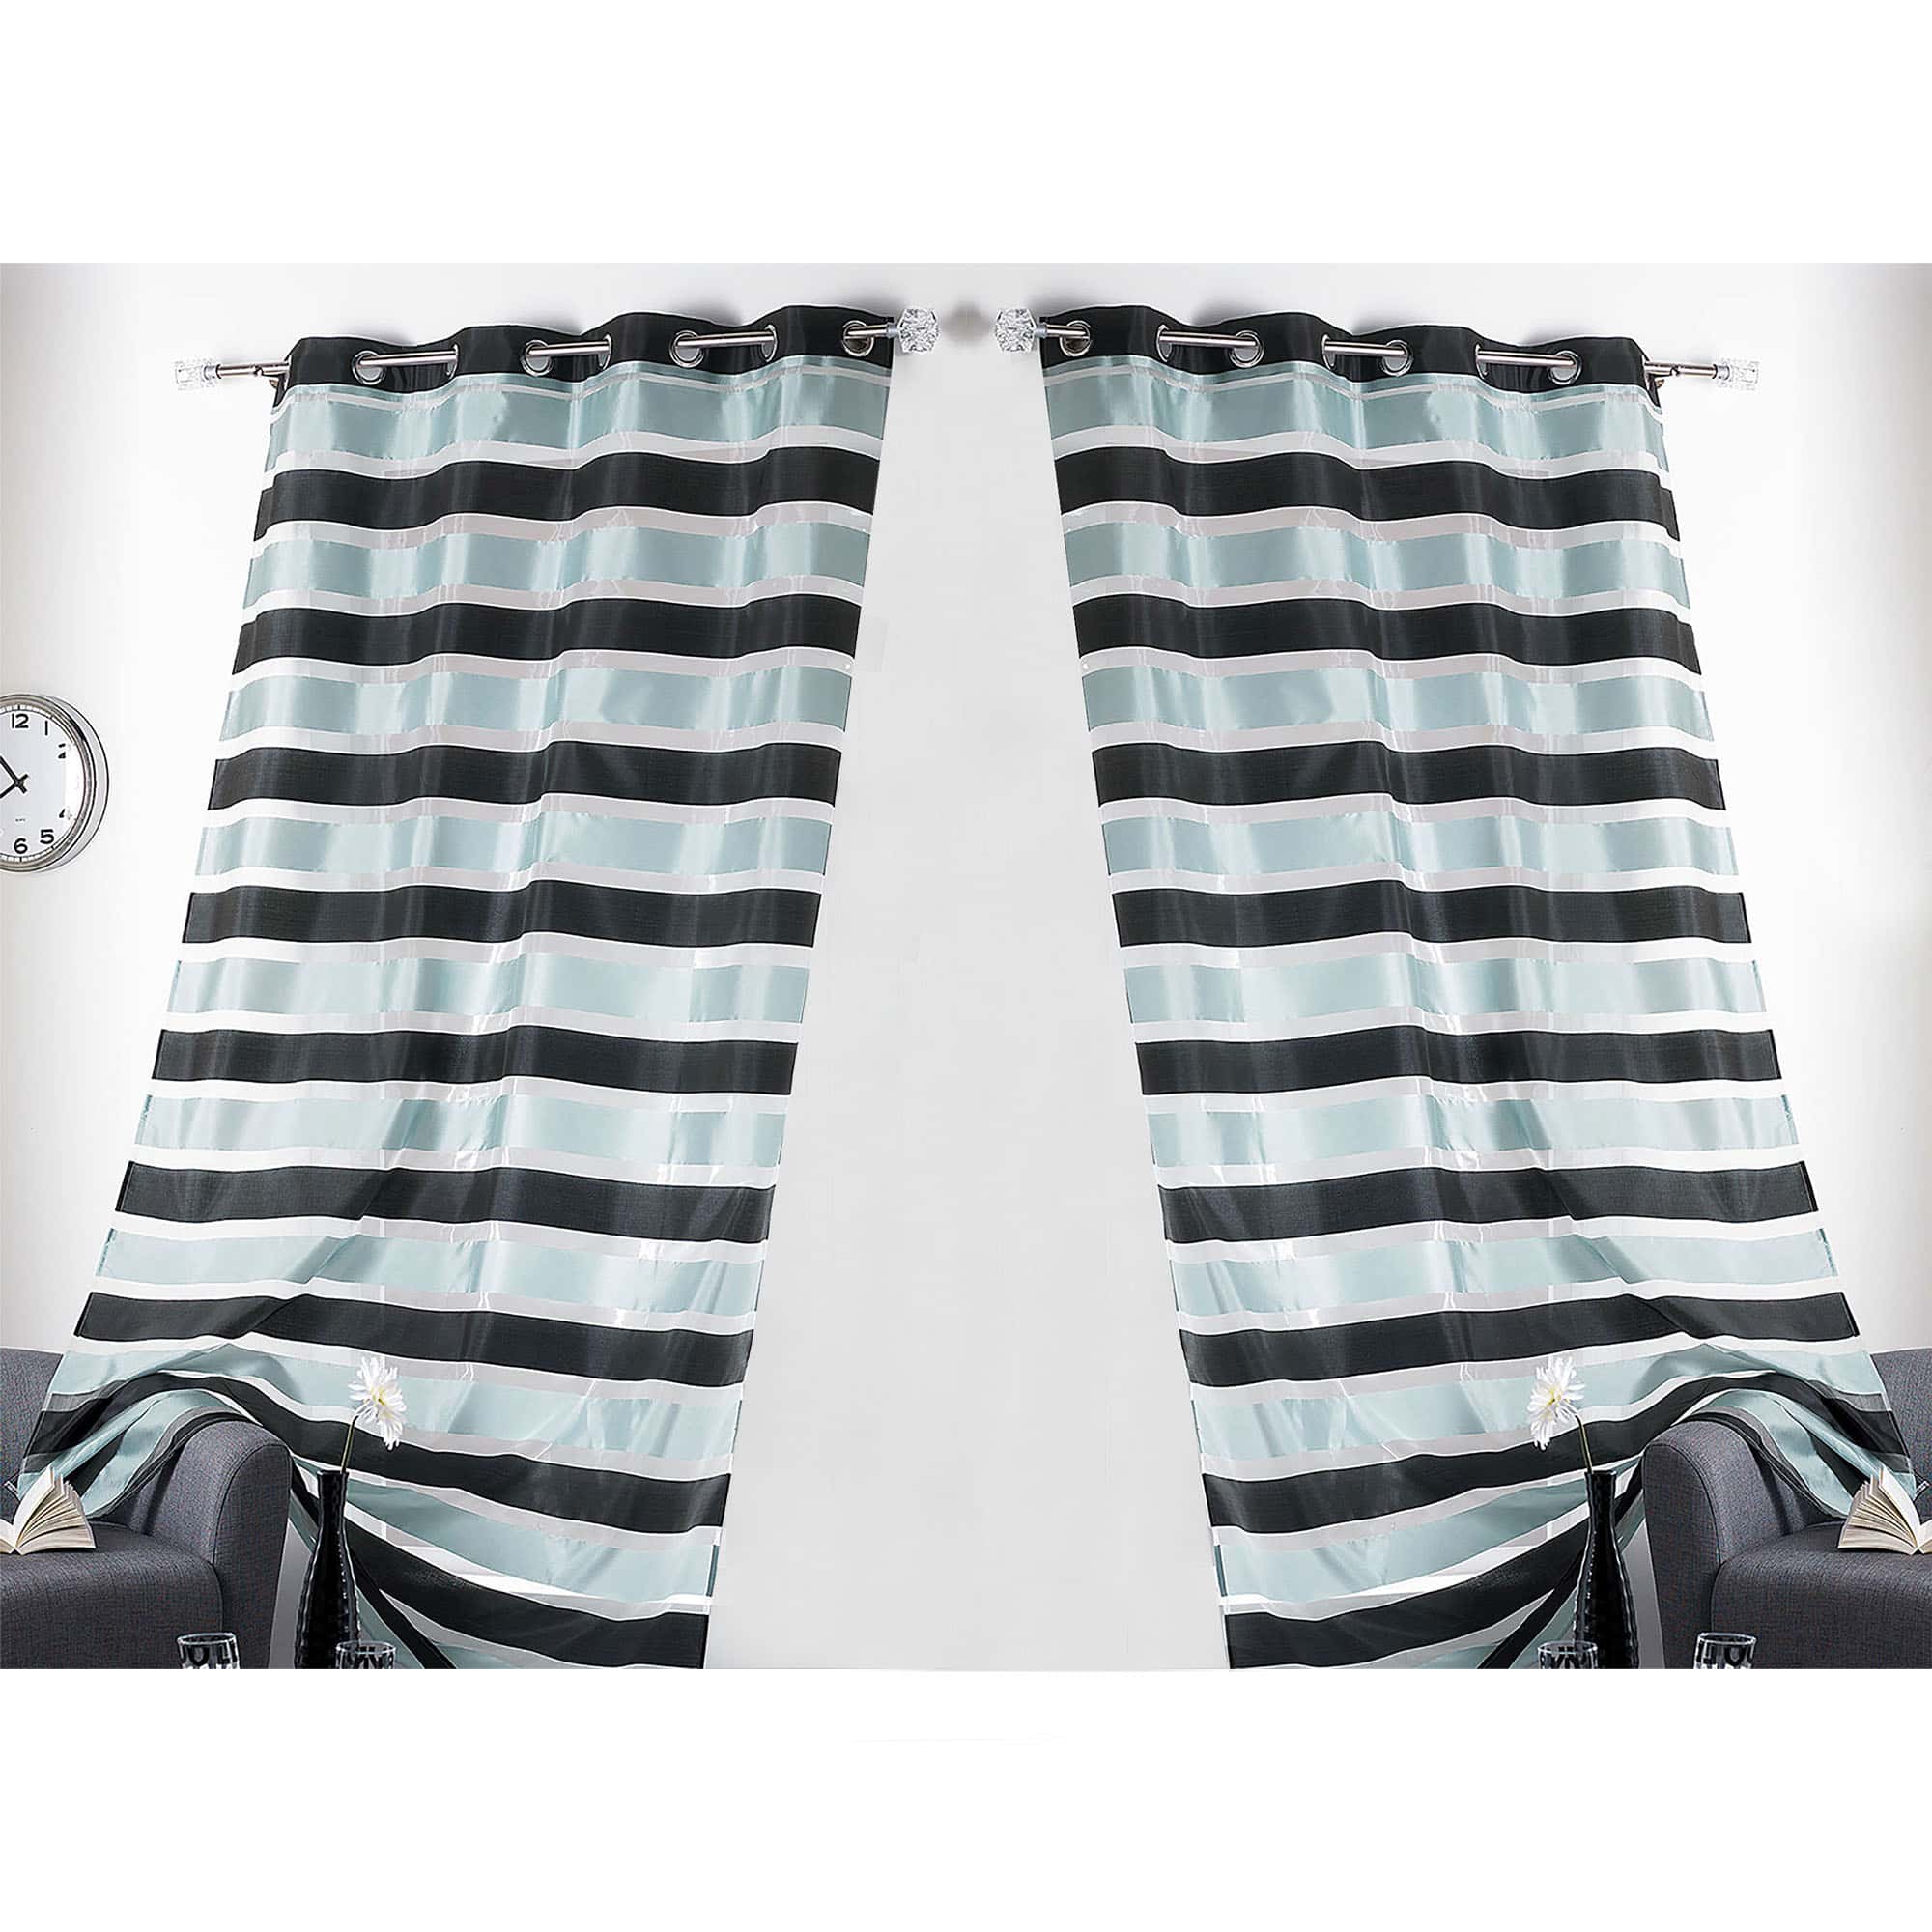 bicolor black blue gray organza striped sheer curtain panels 2 pieces for large window